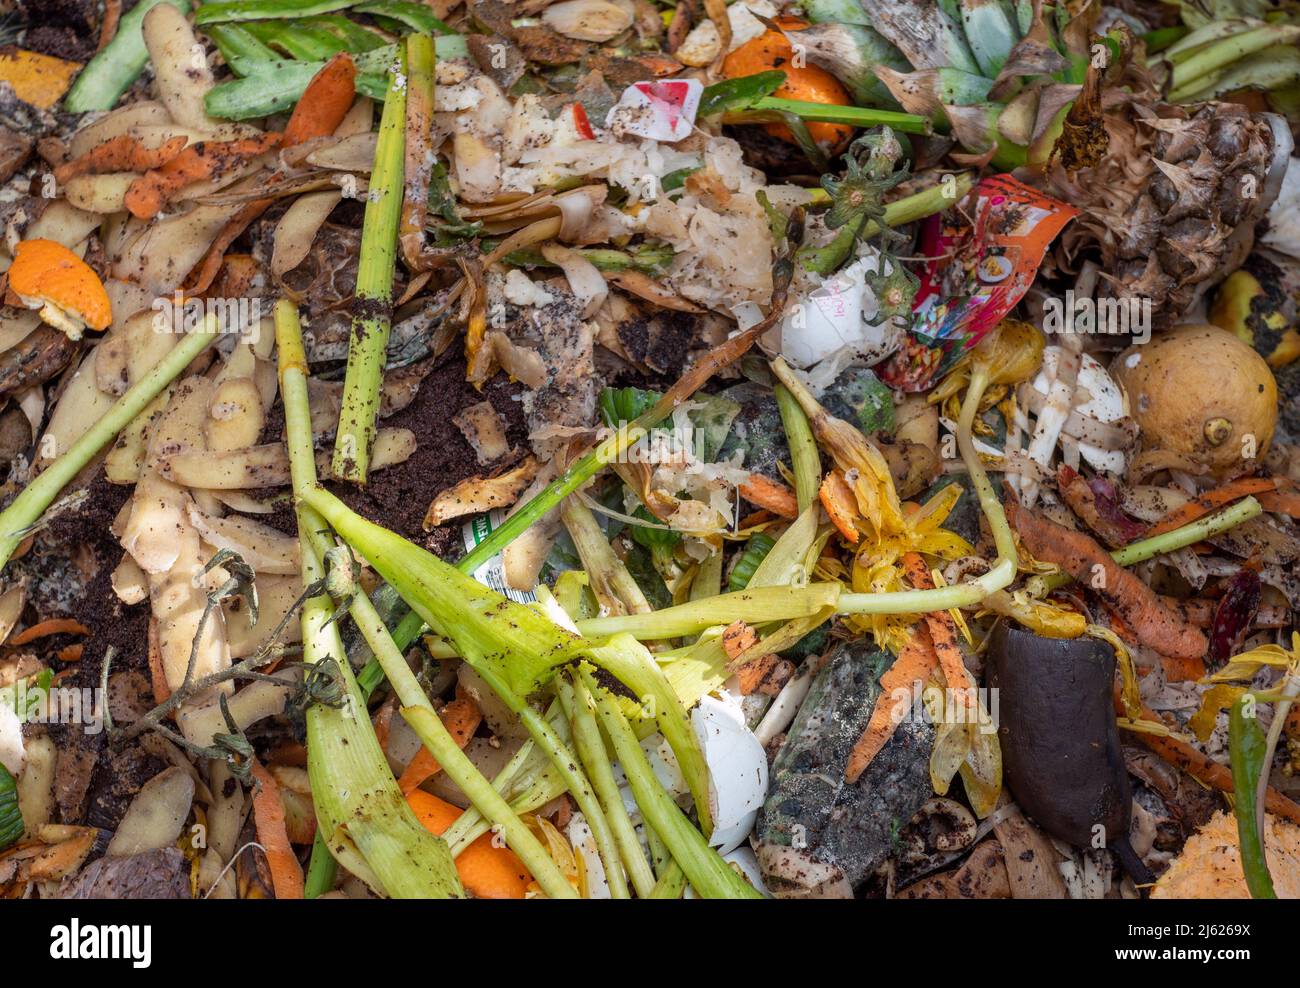 Organic waste on a compost in the garden Stock Photo